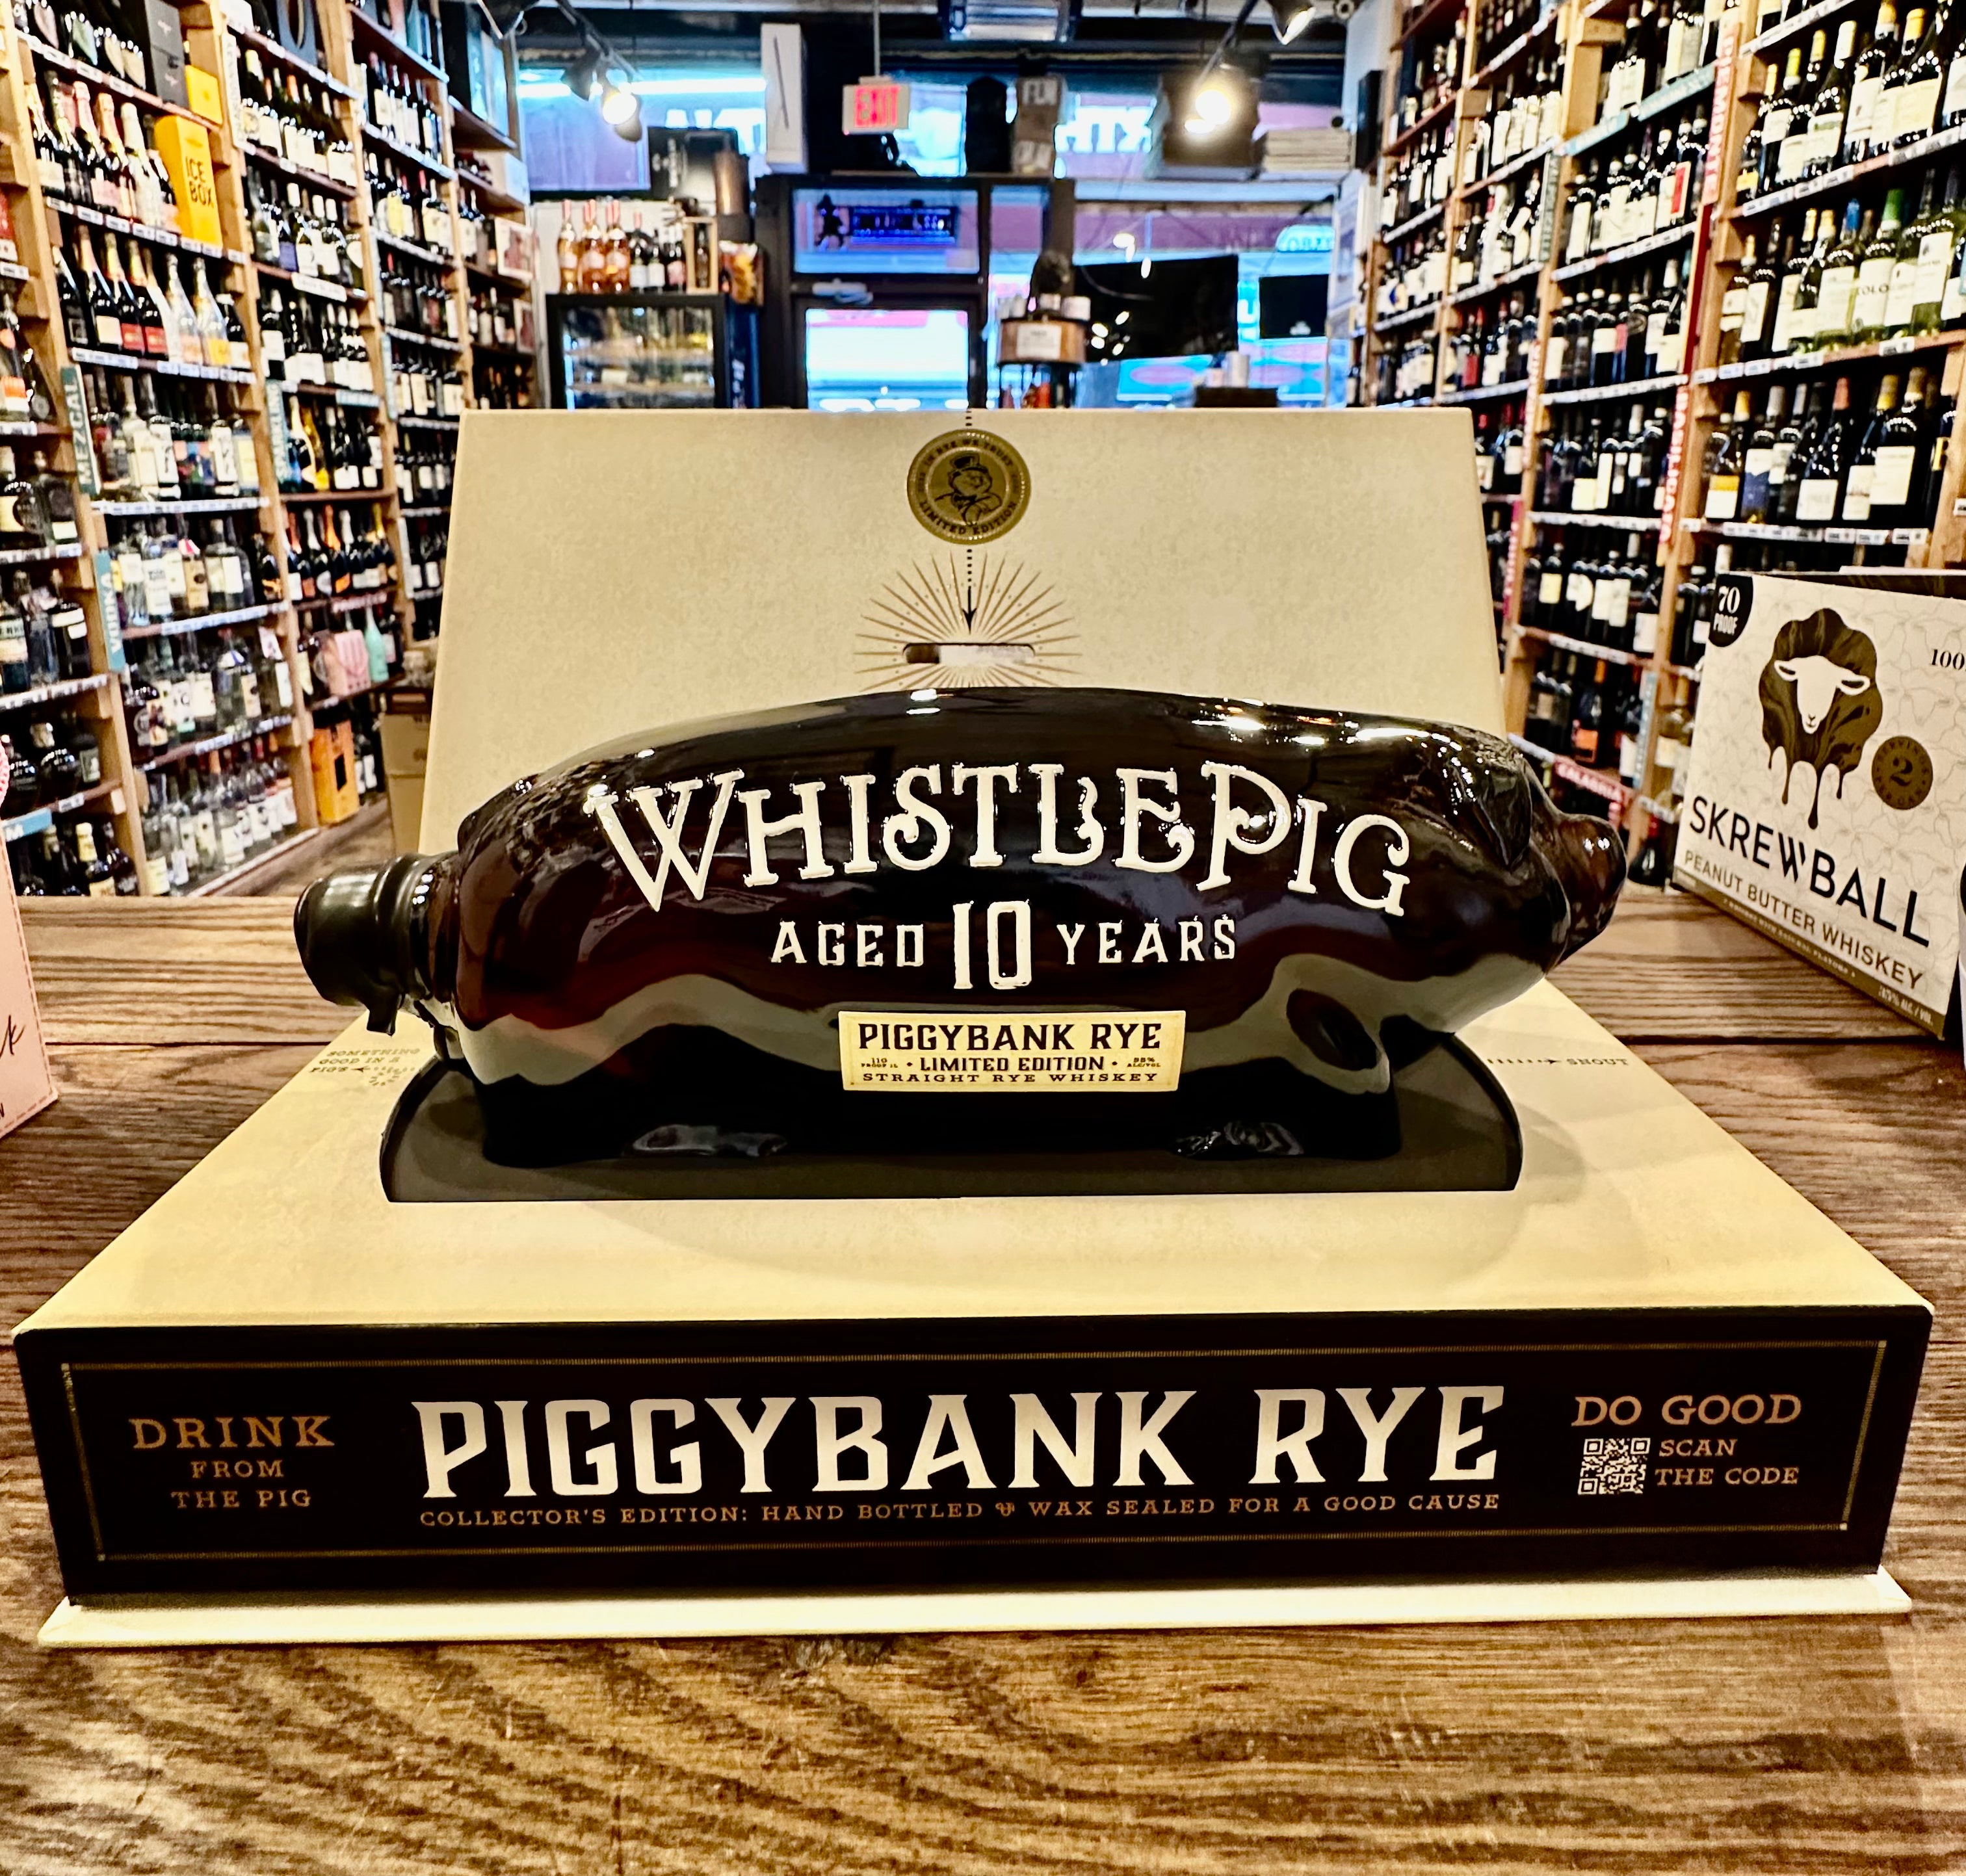 Whistle Pig Piggybank Rye 1L a pig shaped clear glass bottle bottle with white lettering  sitting on top of a rectangle shaped box stand that is beige and black in color